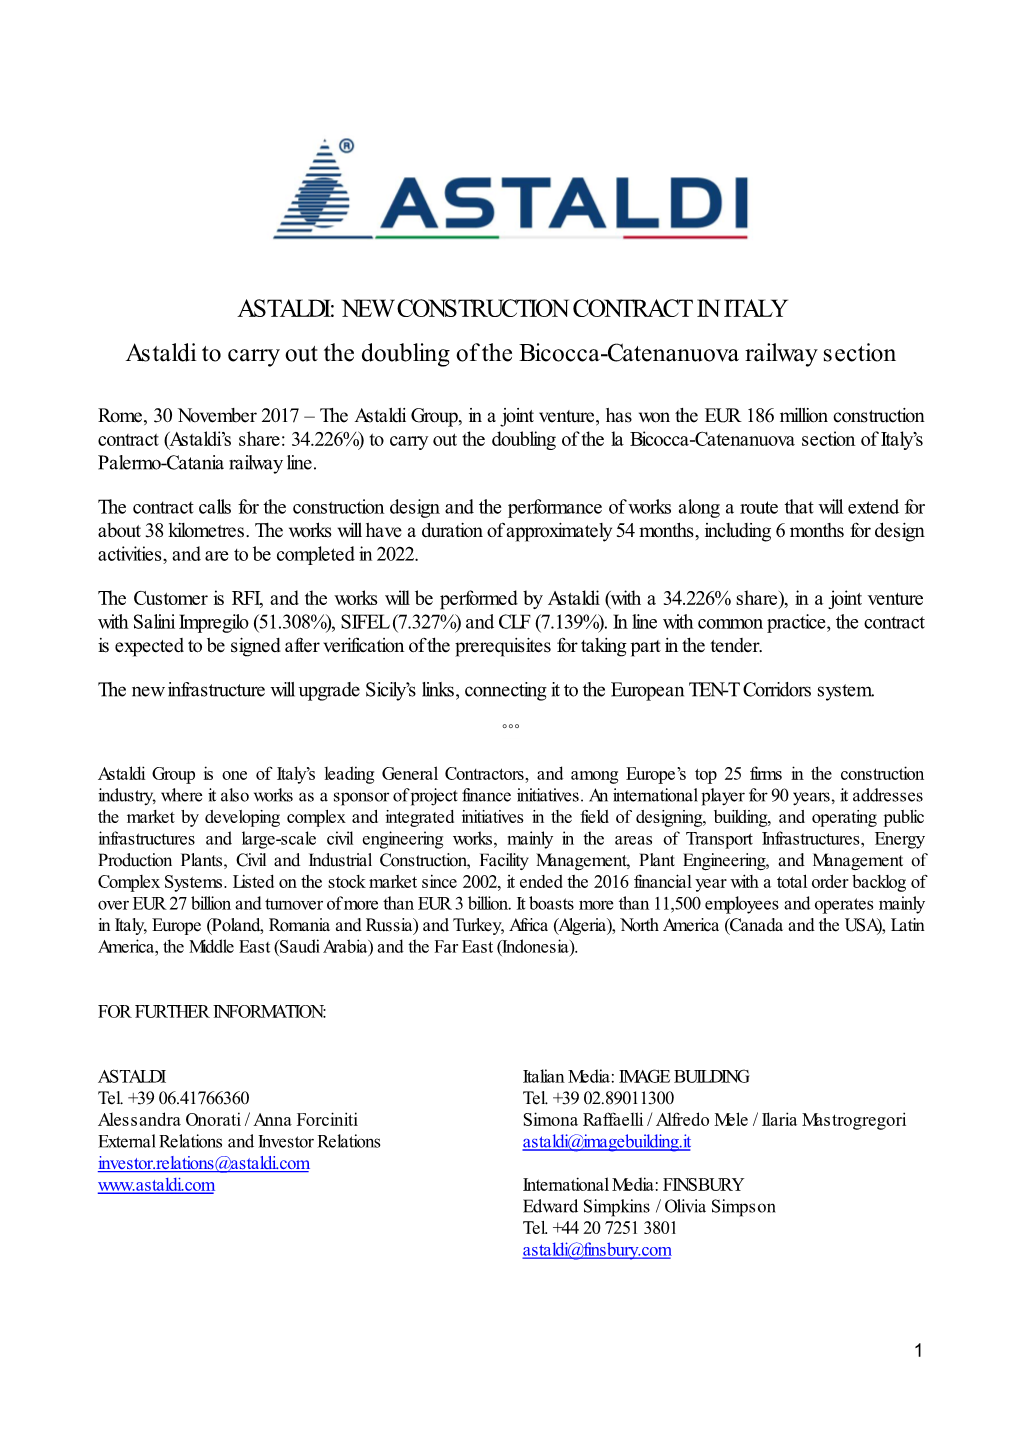 NEW CONSTRUCTION CONTRACT in ITALY Astaldi to Carry out The